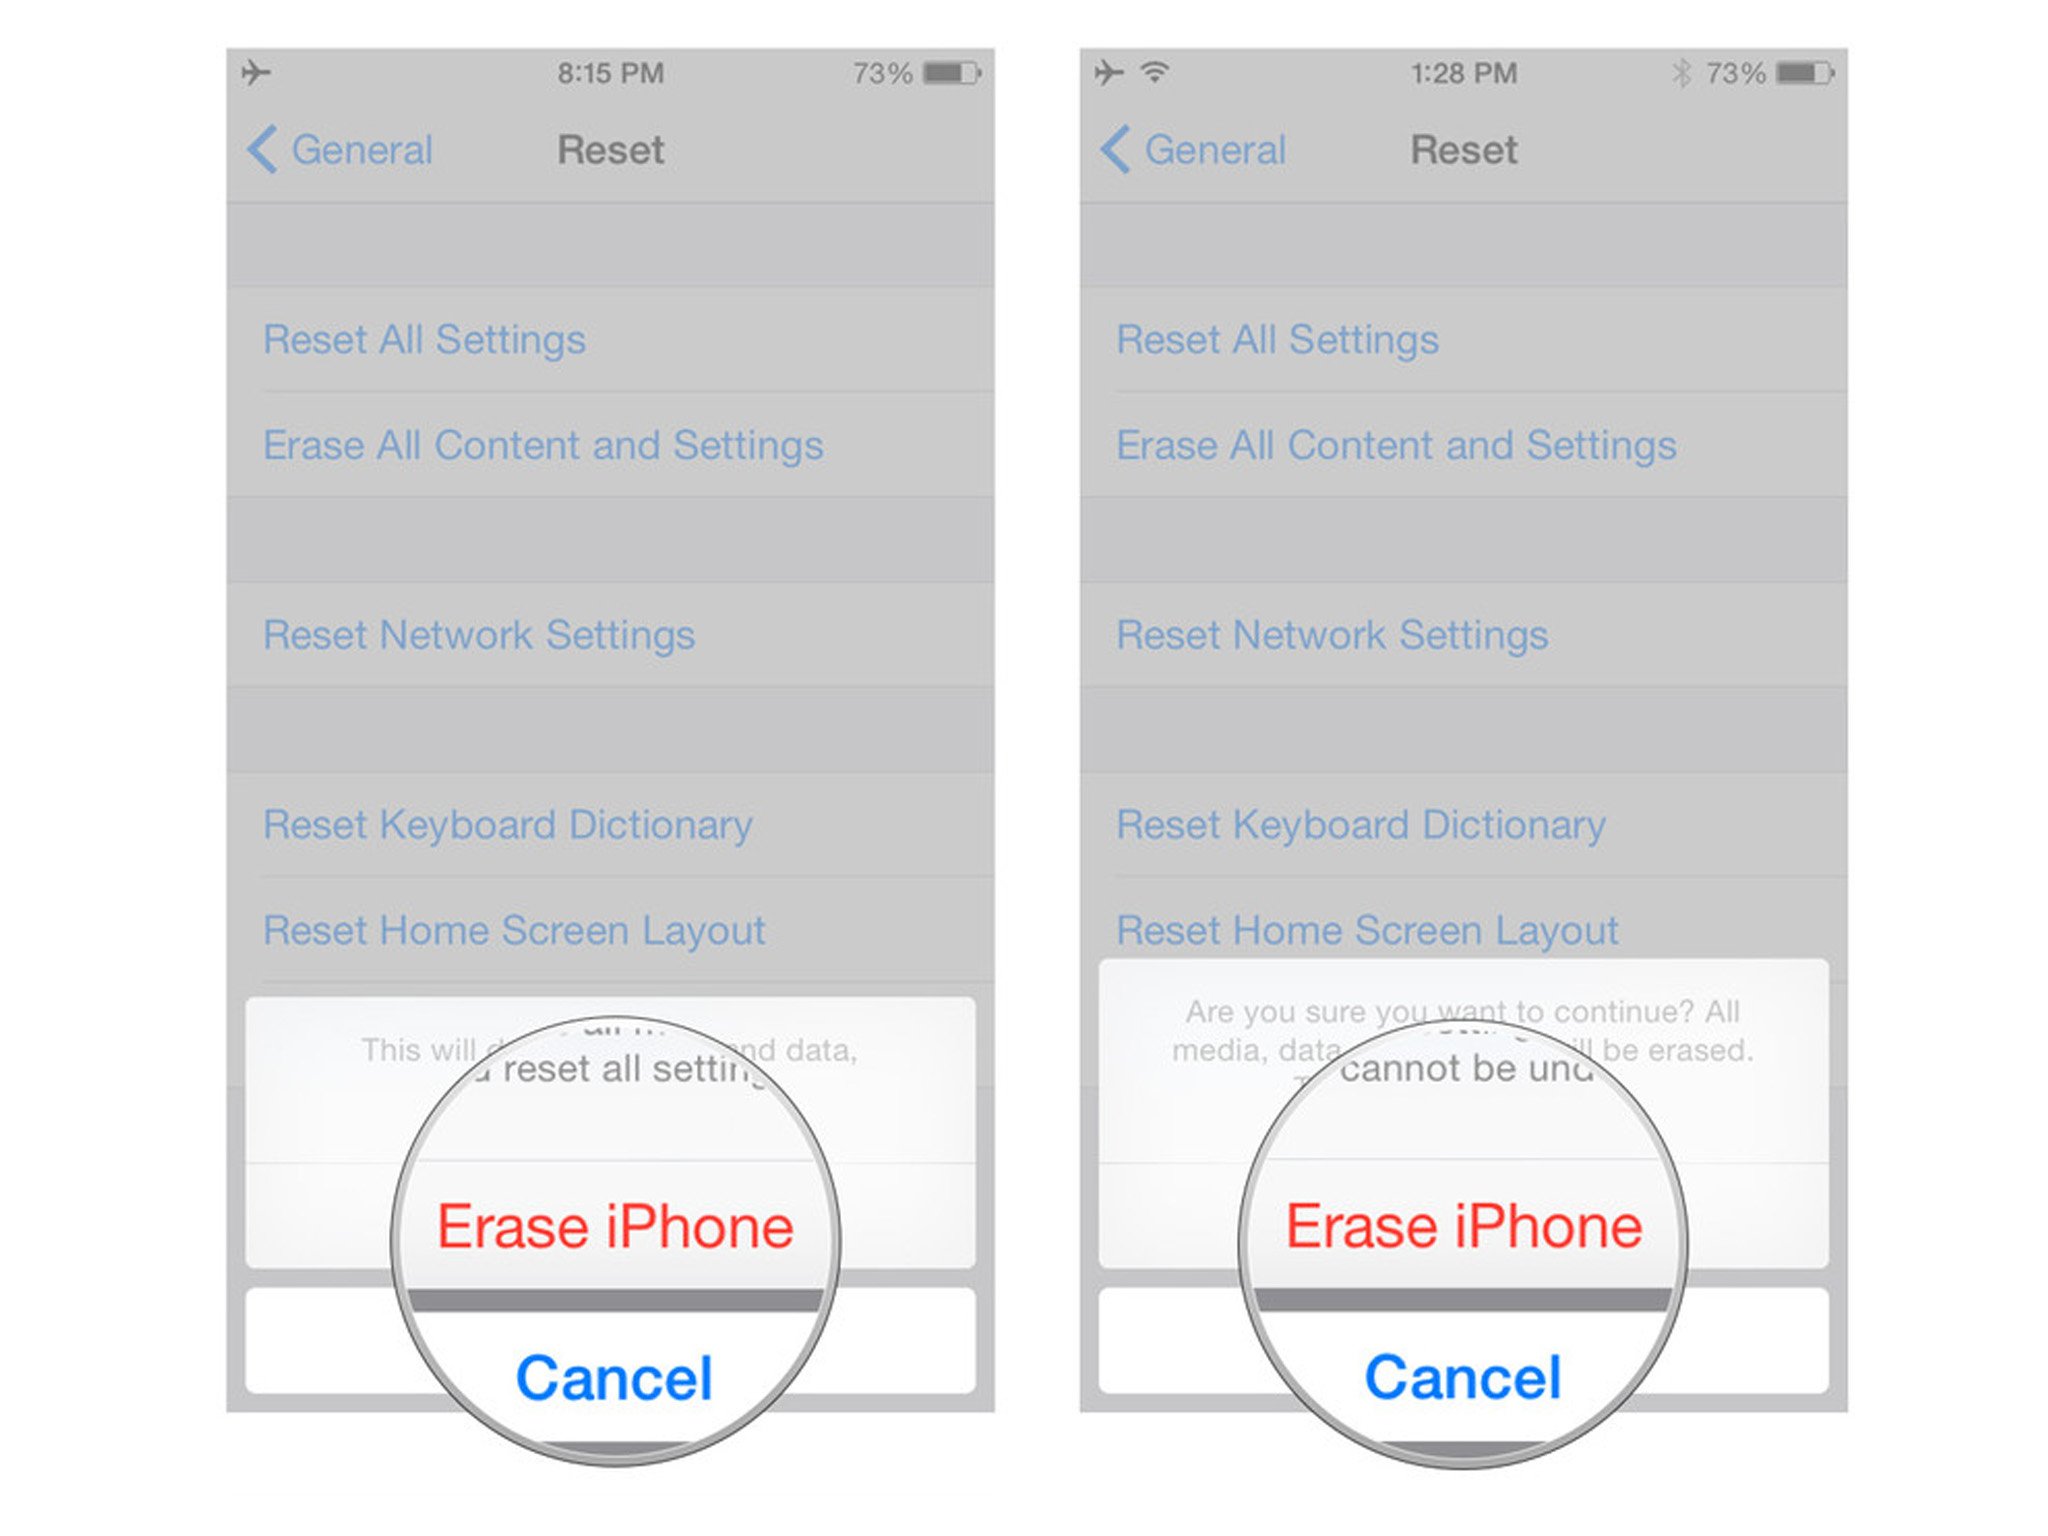 Erasing your personal data, showing how to tap Erase iPhone, then tap Erase iPhone to confirm